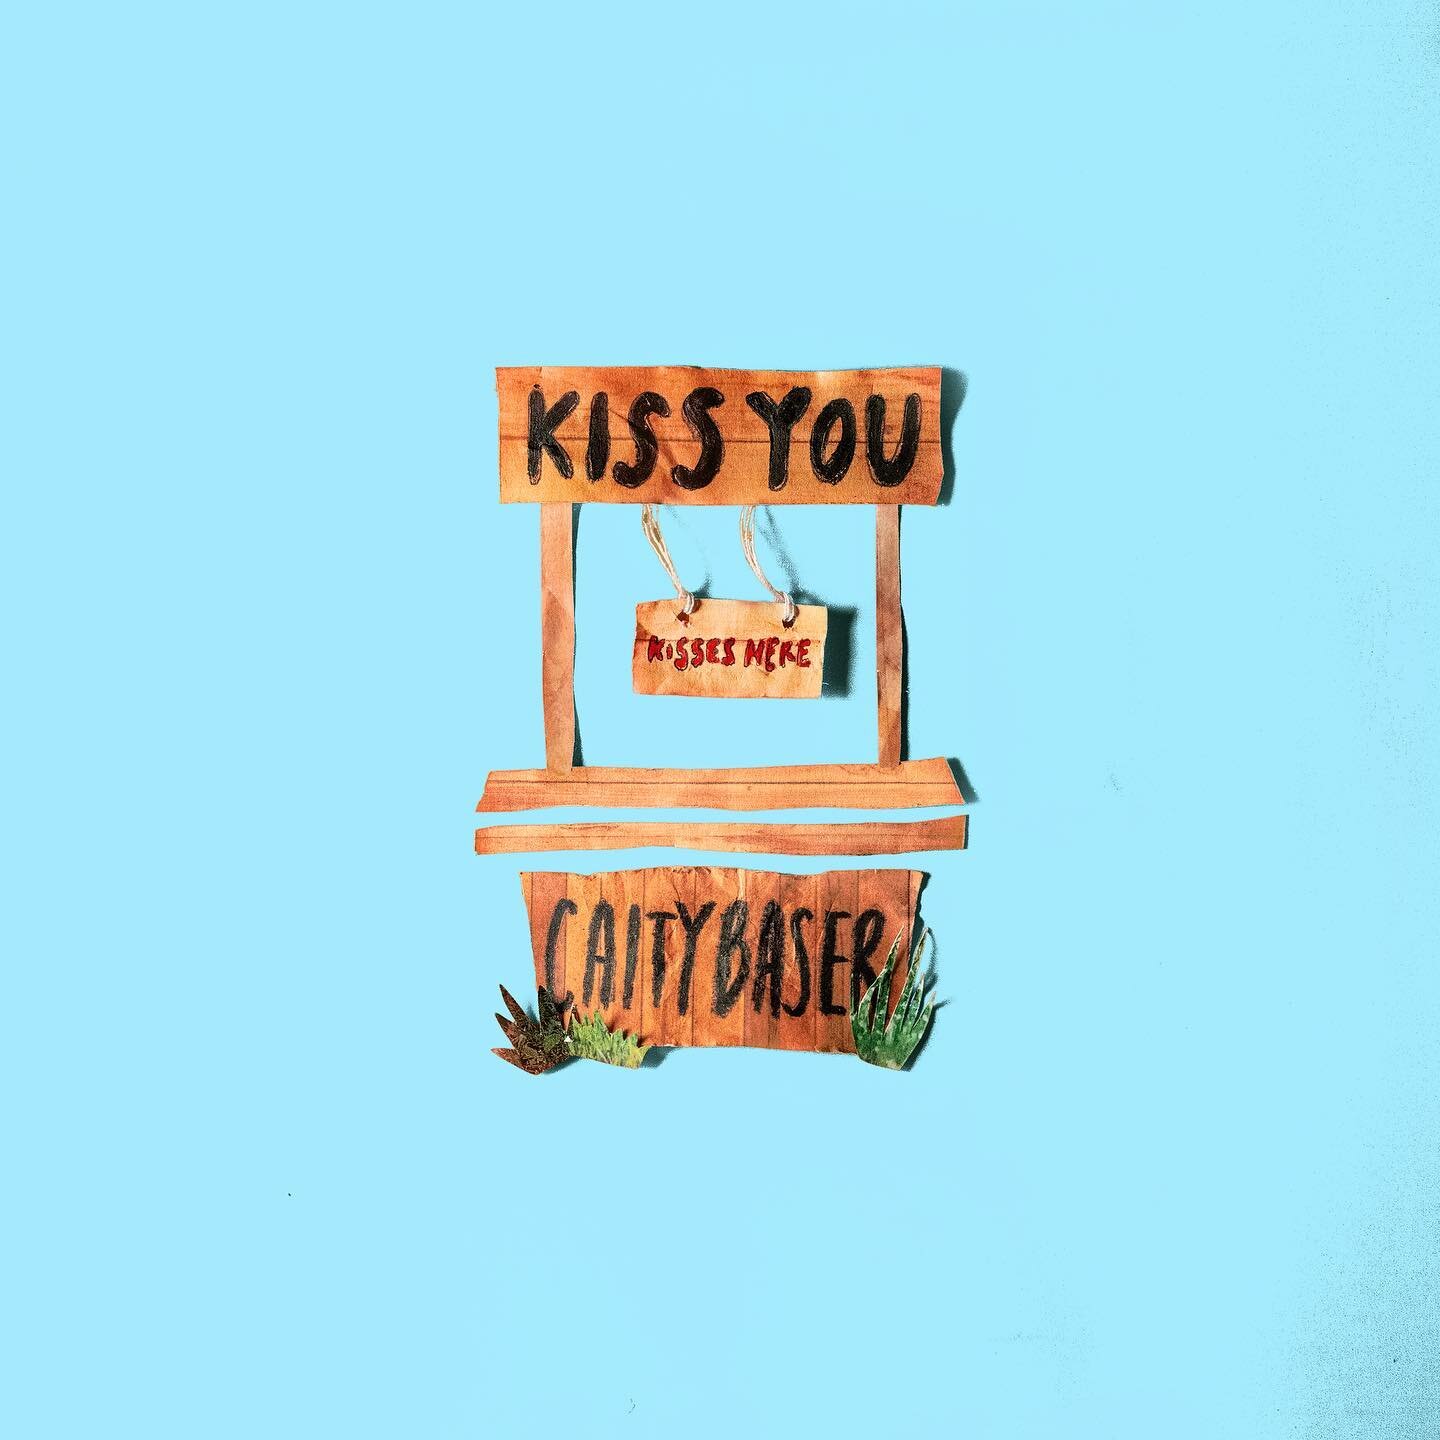 &ldquo;Kiss You&rdquo; - @caitybaser. Produced and co-written by @thenocturns